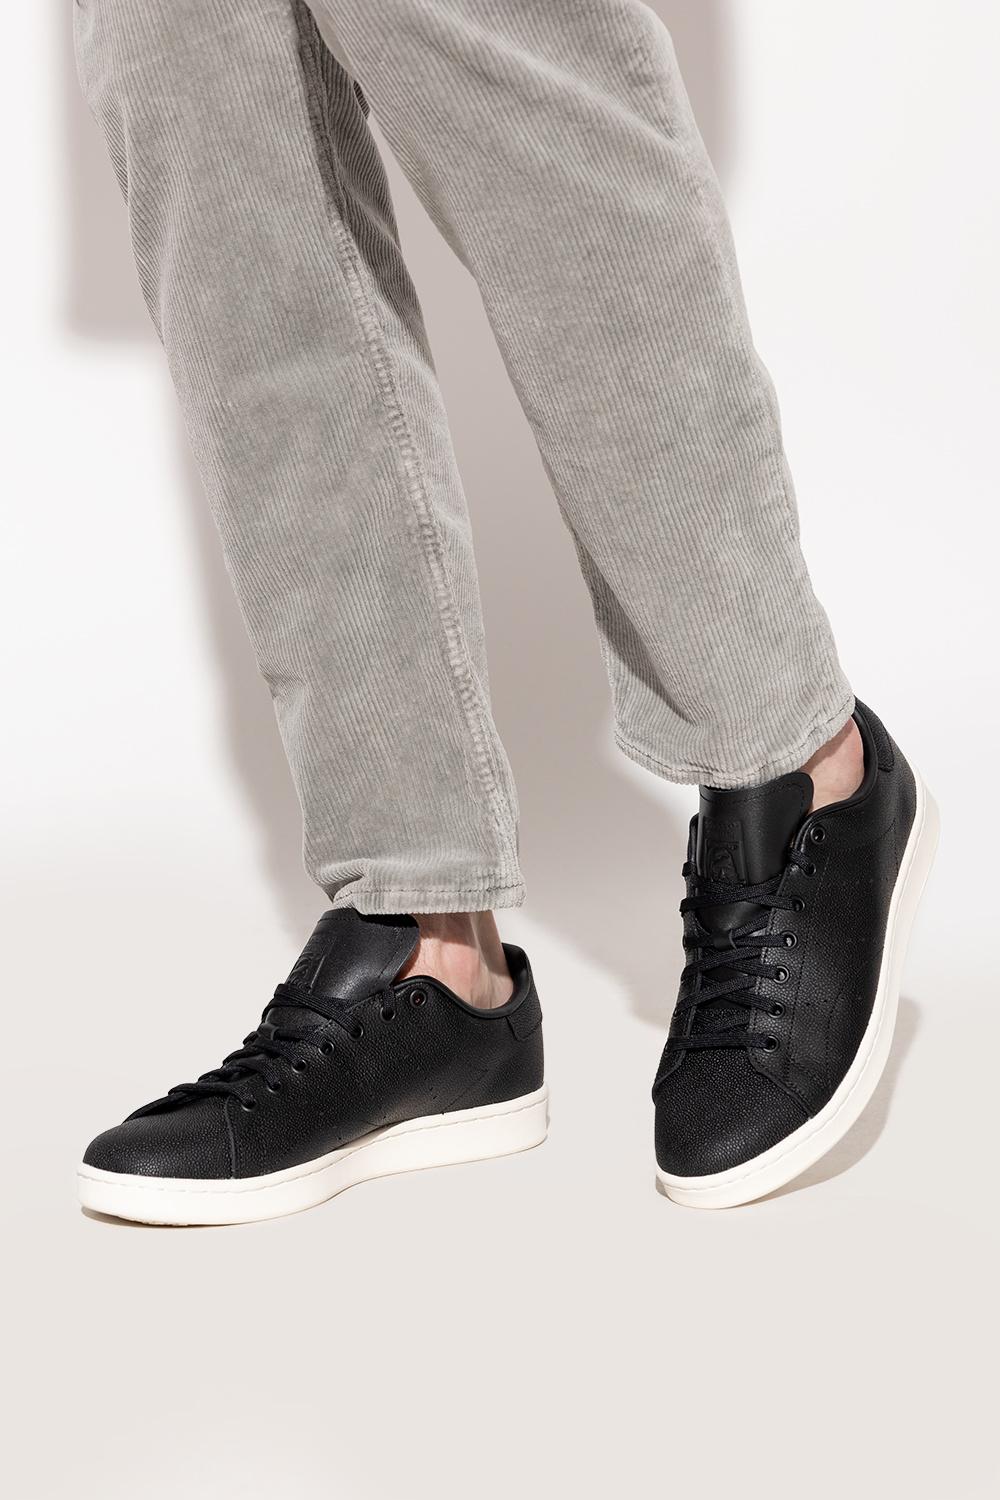 adidas Originals Leather 'stan Smith H' Sneakers in Black for Men | Lyst